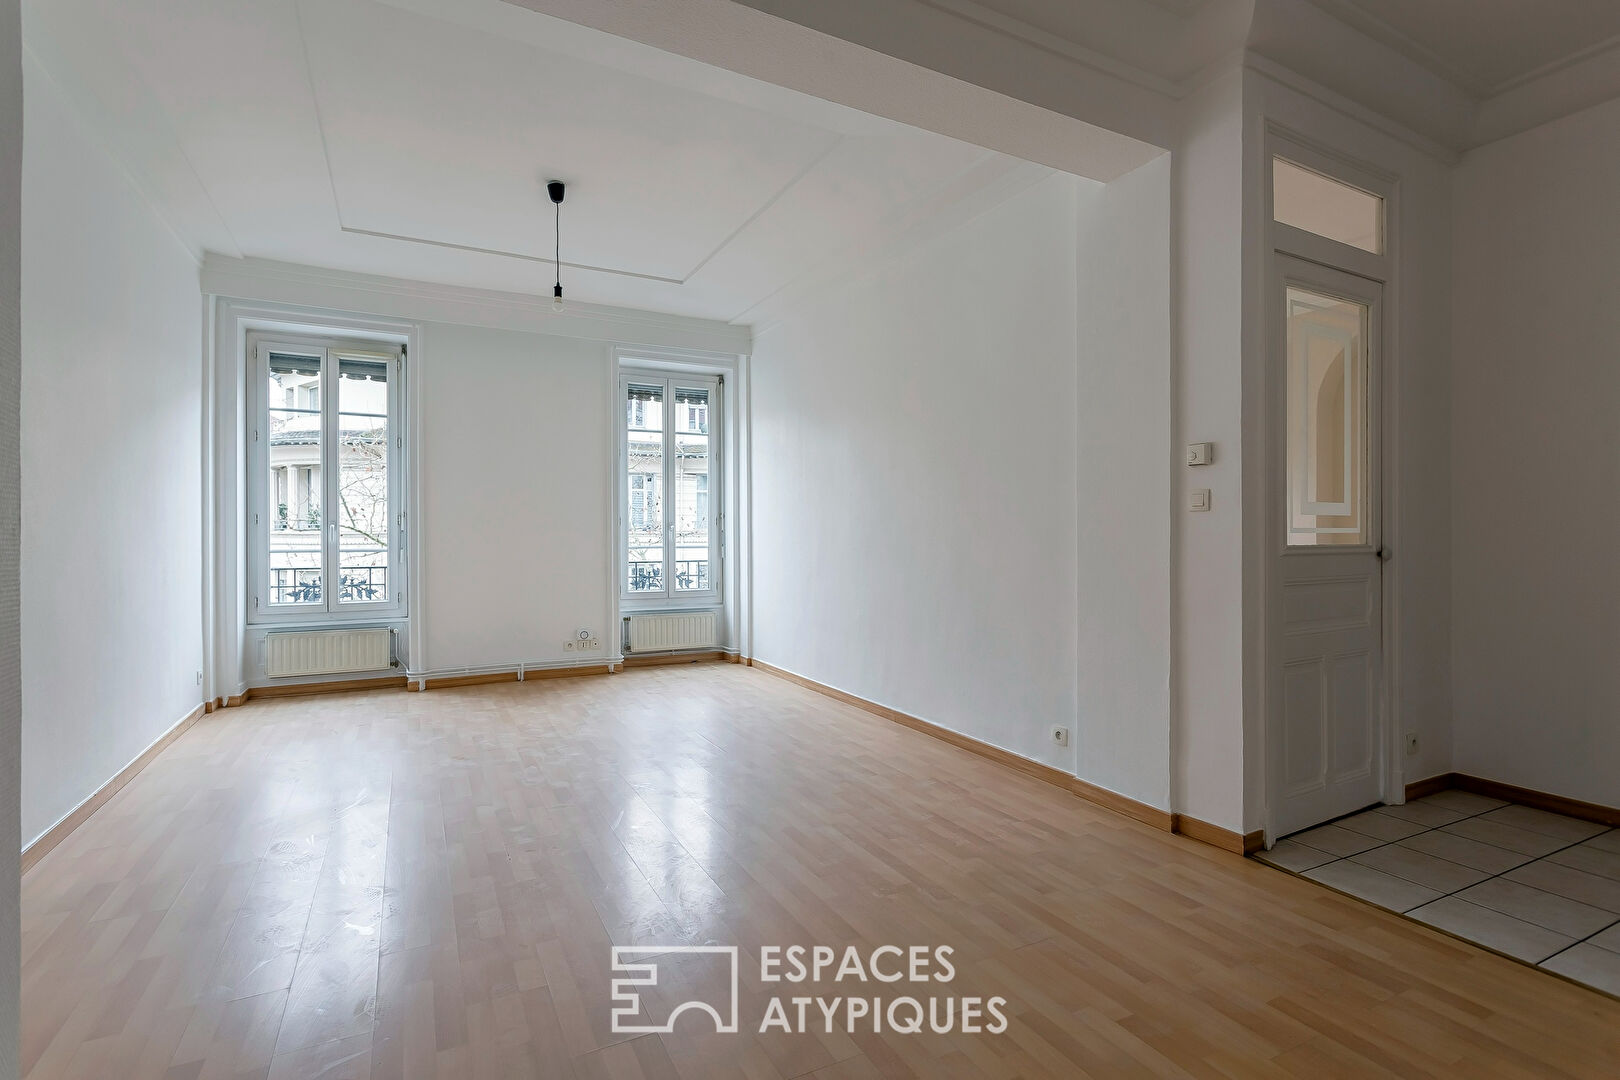 Attractive renovation in the heart of Brotteaux